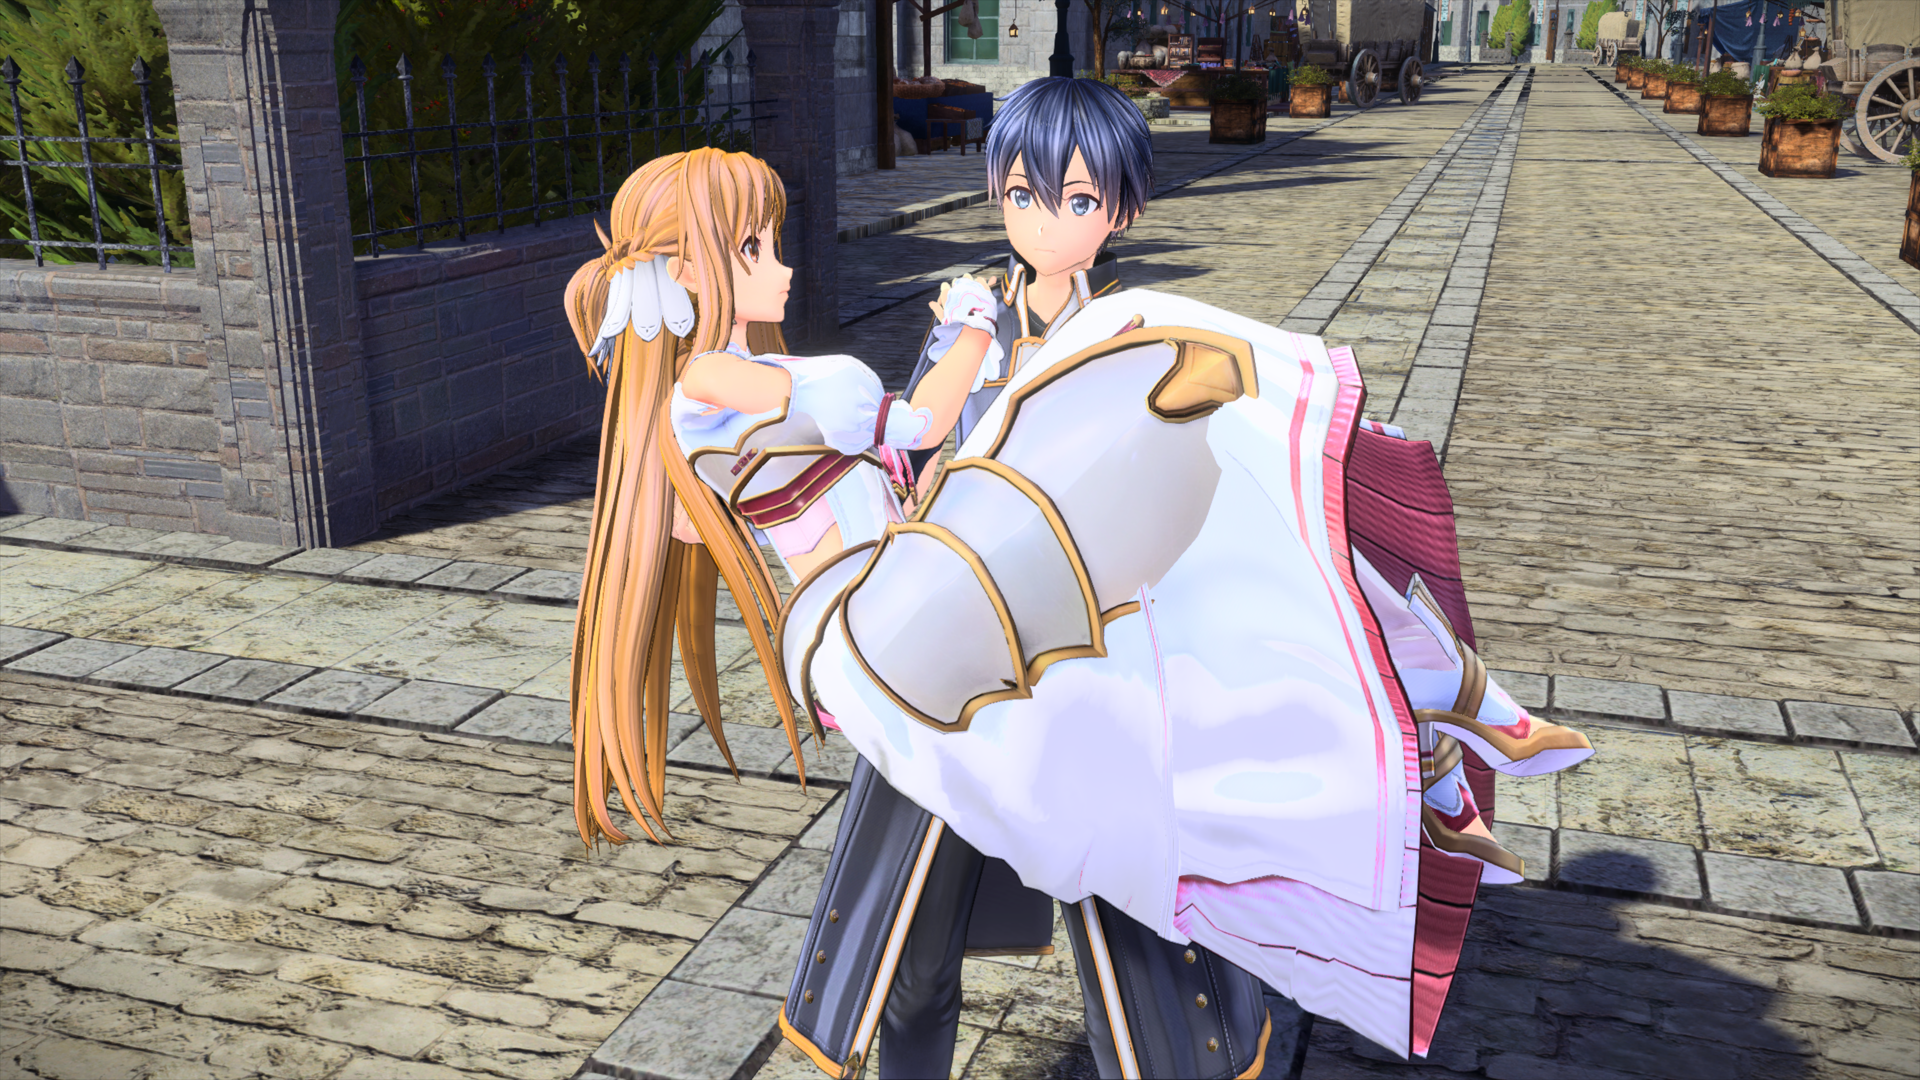 New playable characters announced for Sword Art Online: Alicization Lycoris  — Maxi-Geek